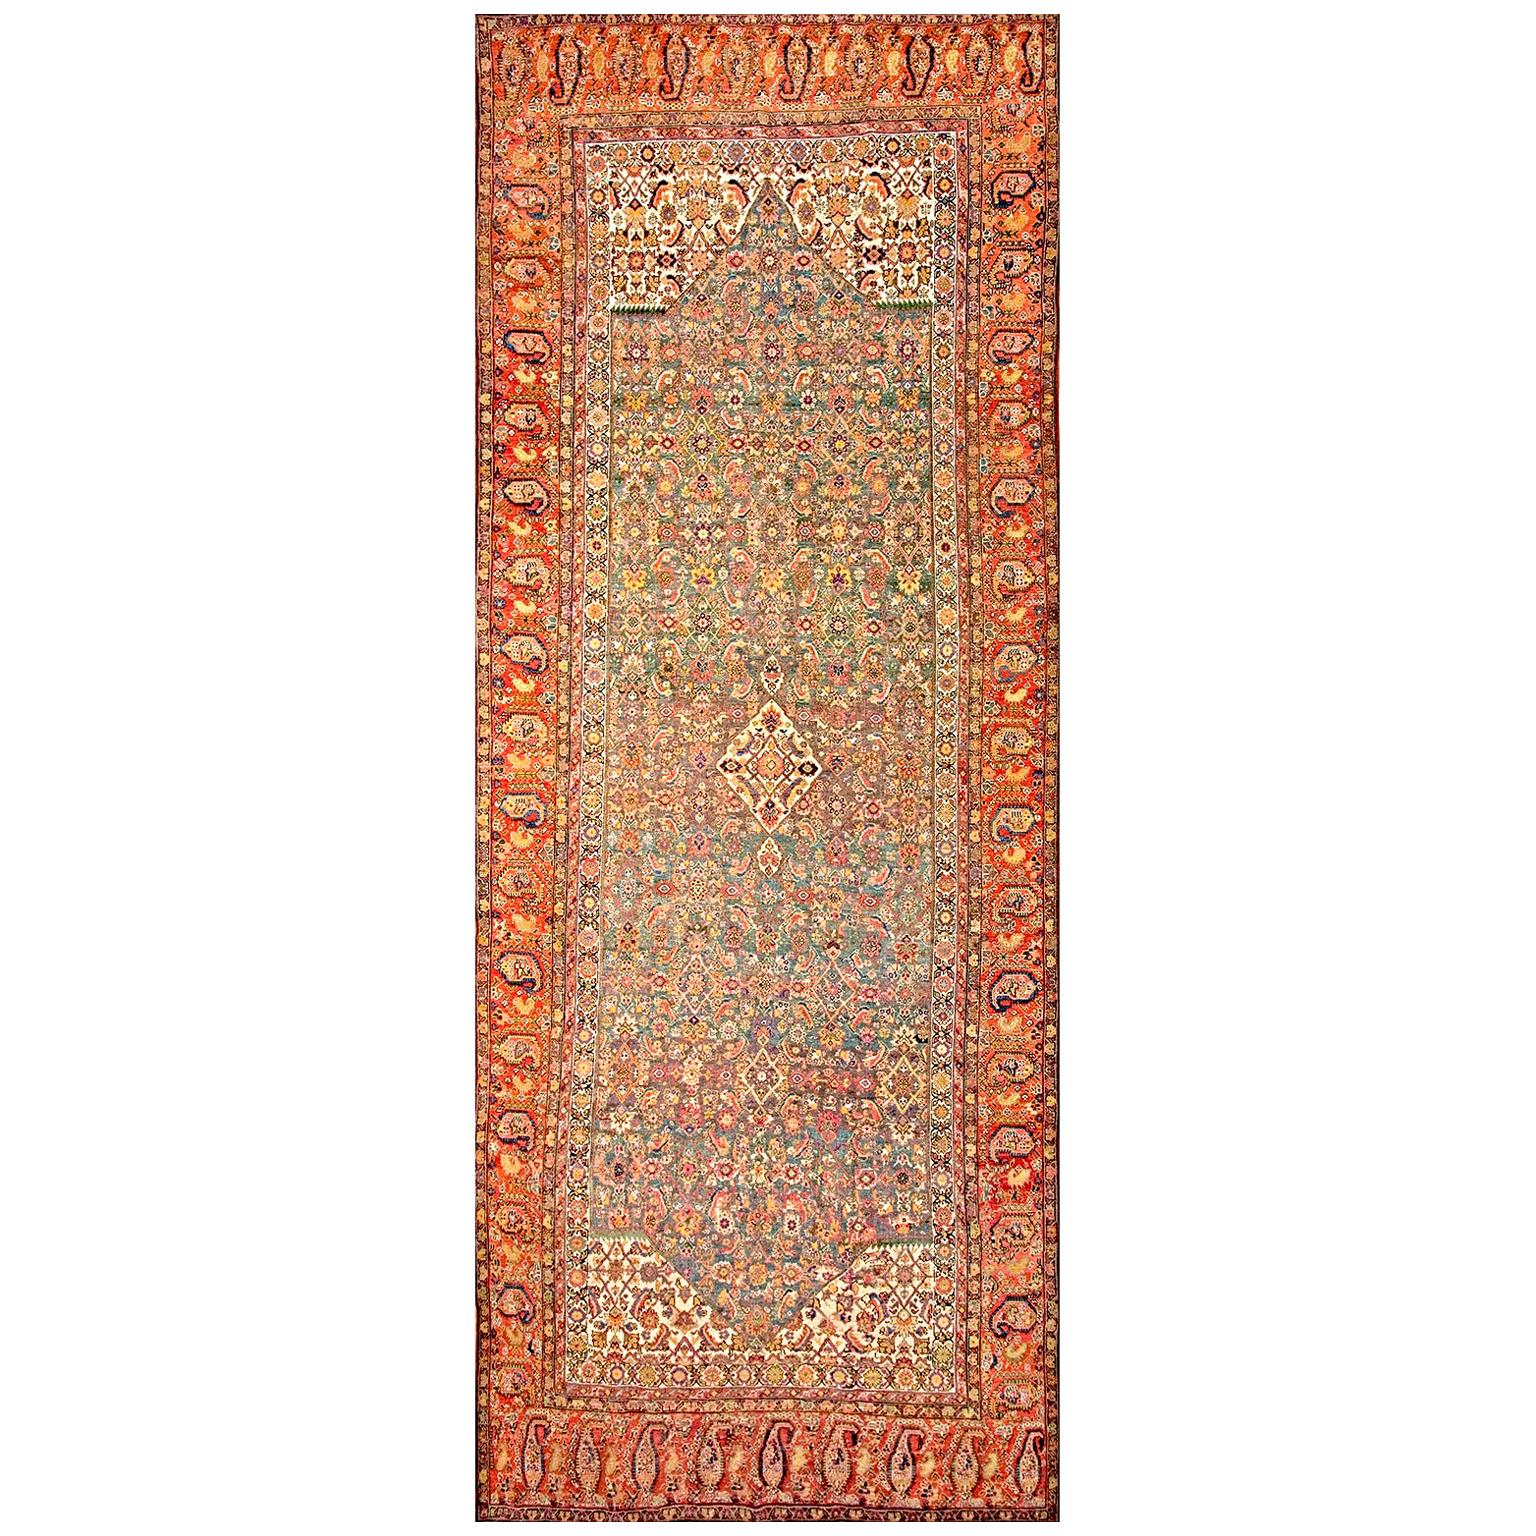 Early 19th Century N.W. Persian Gallery Carpet ( 6'10" x 17' - 208 x 518 ) For Sale